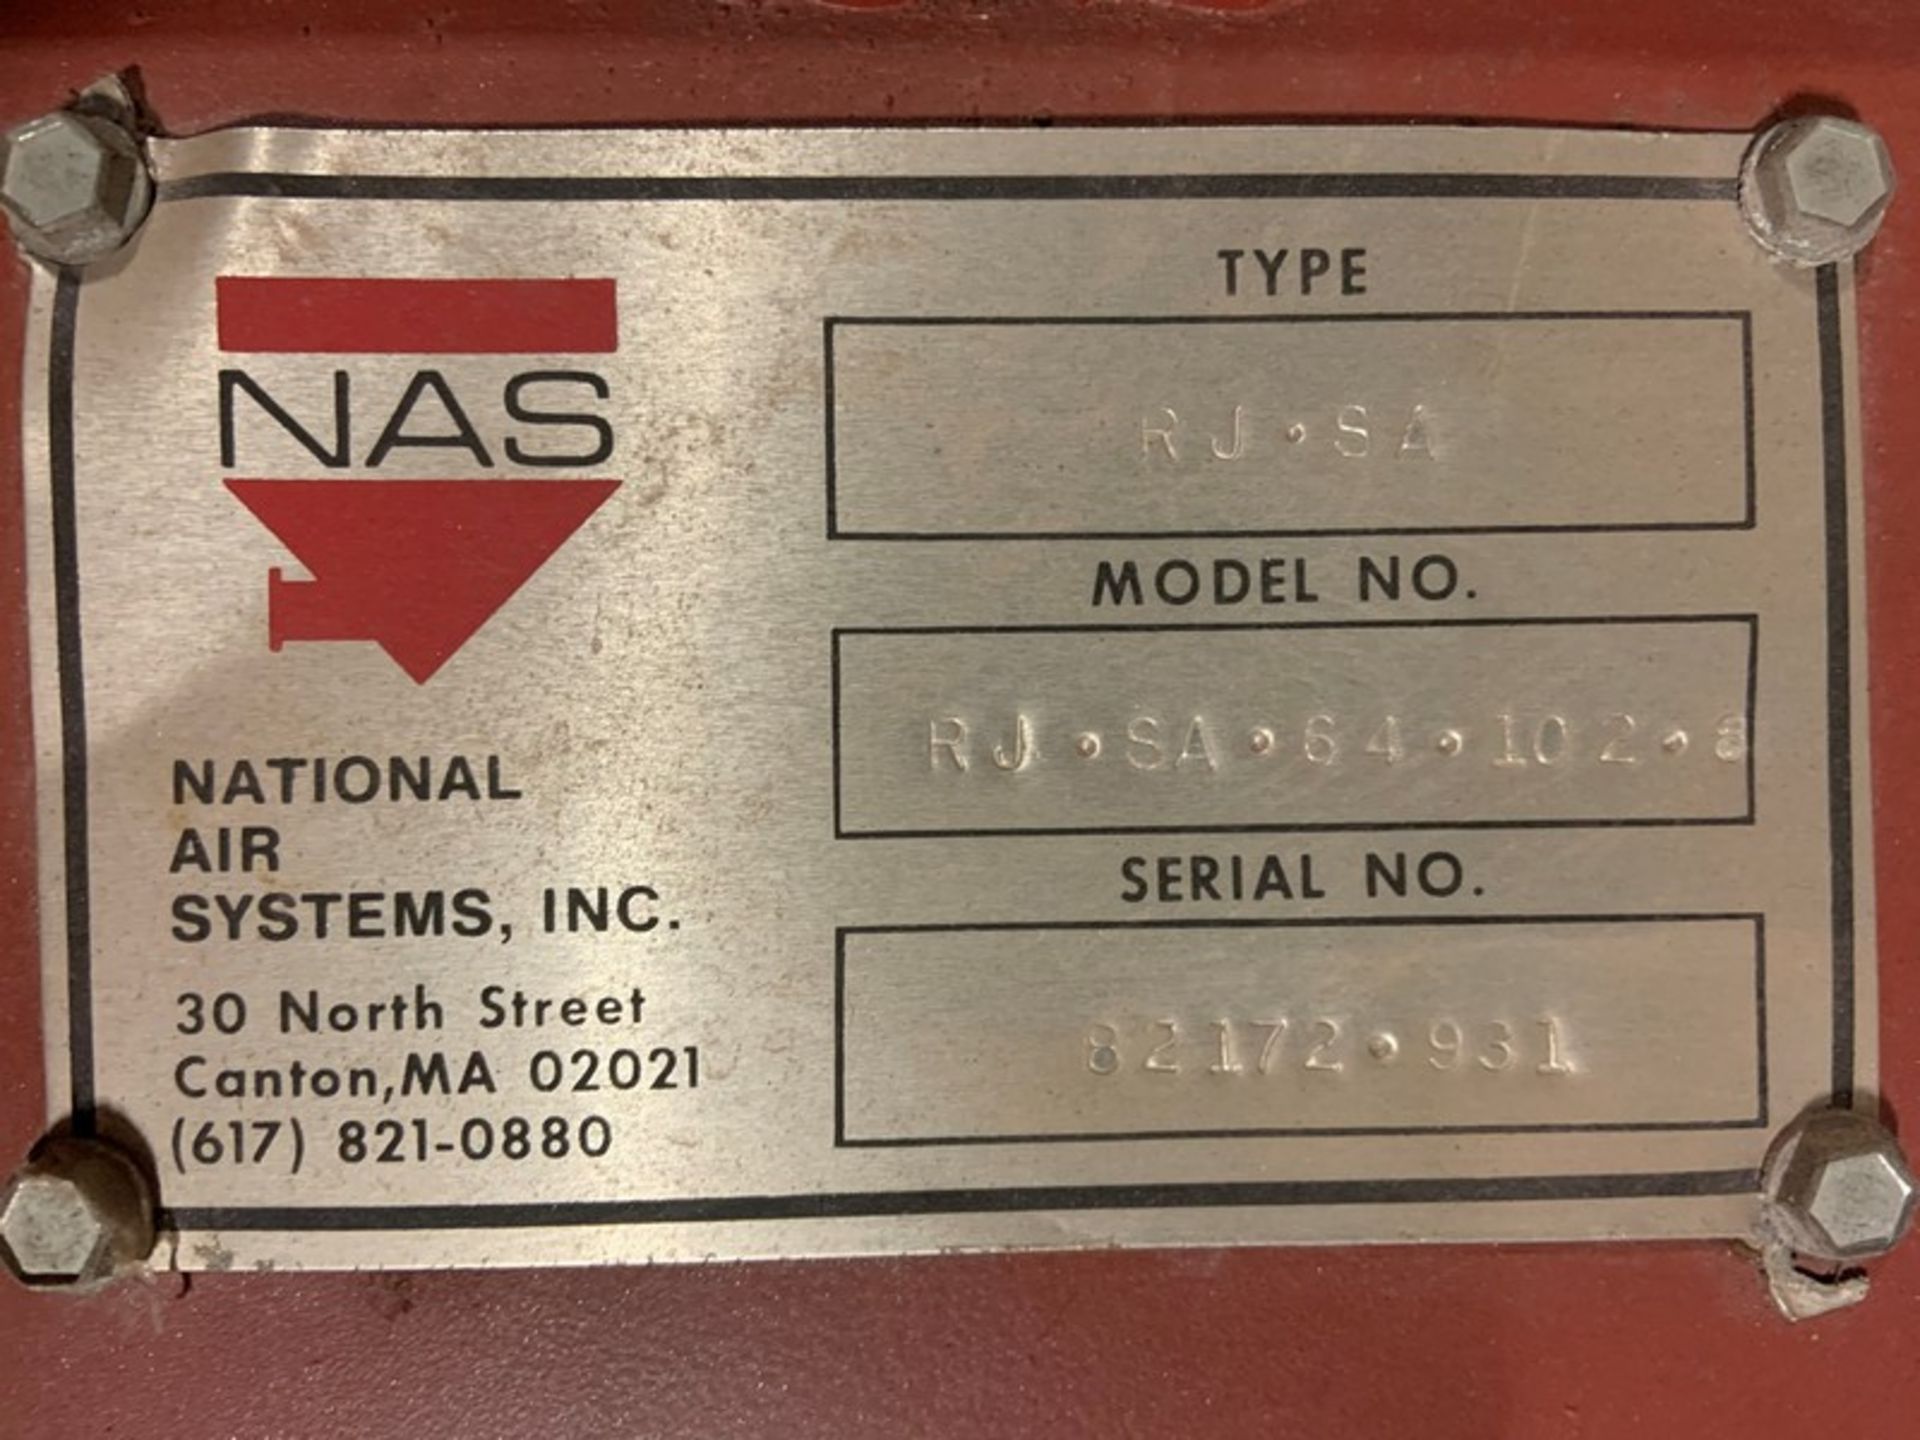 National Air Systems Dust Collector, type RJ SA, model RJ SA 64 1028, Serial # 82172 931, includes - Image 2 of 4